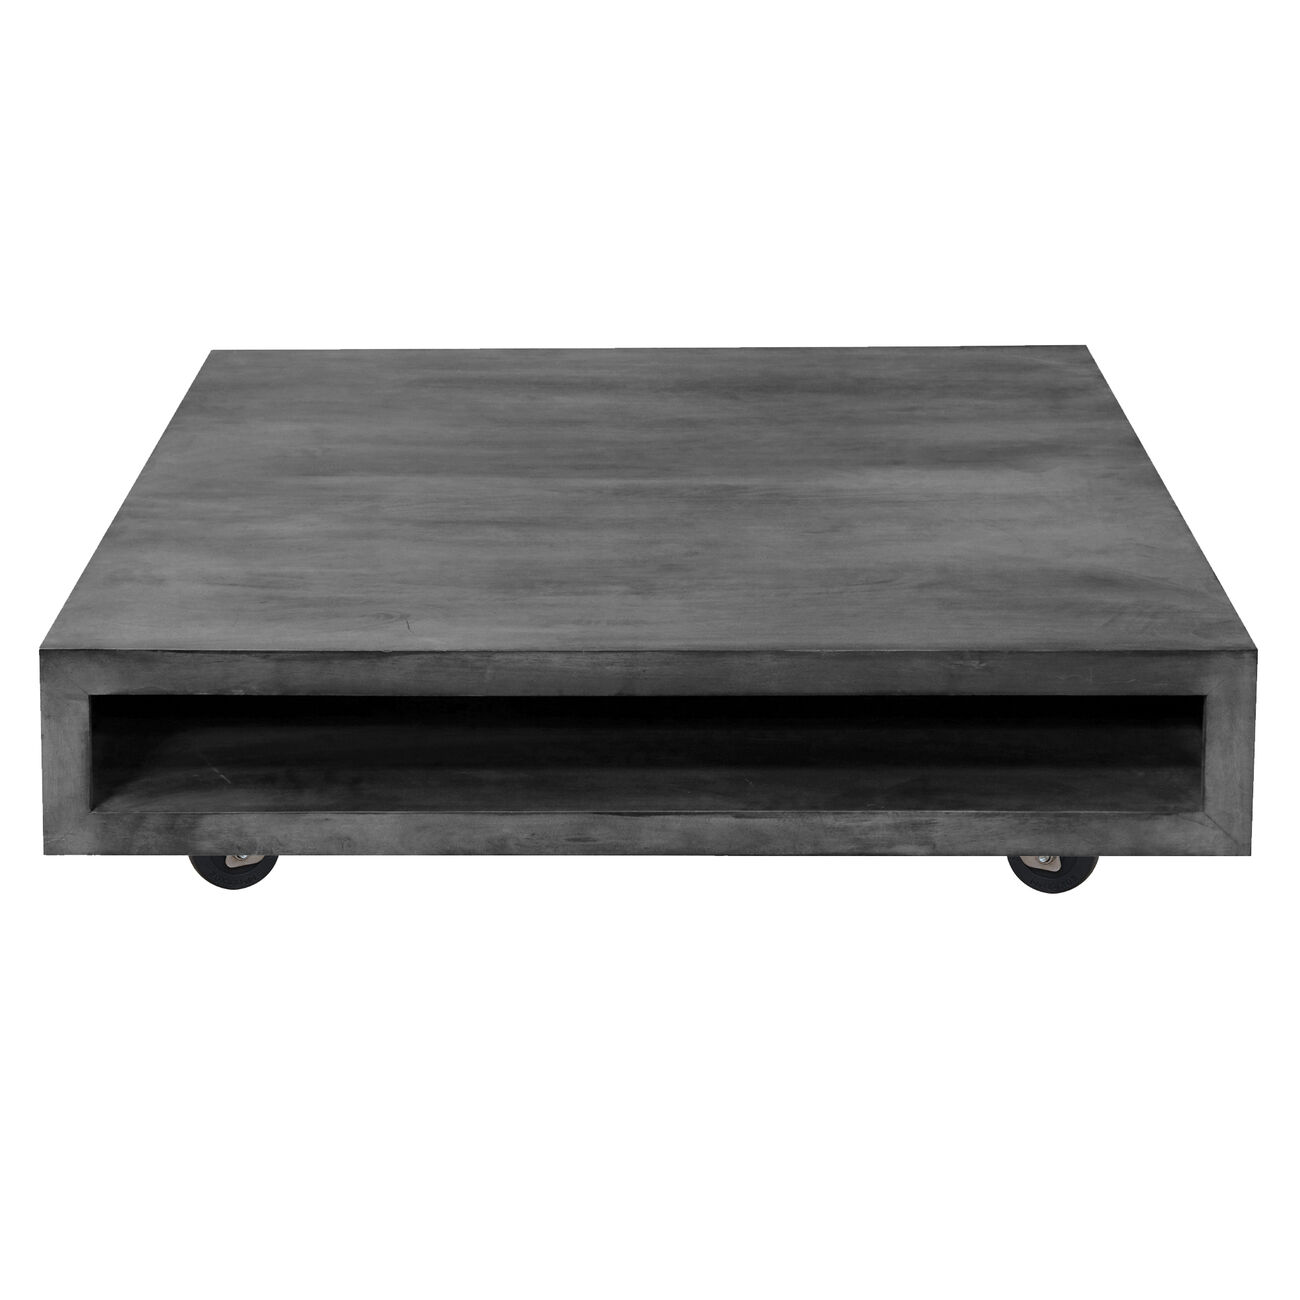 Square Mango Wood Coffee Table with Casters and Open Storage Compartment, Grey